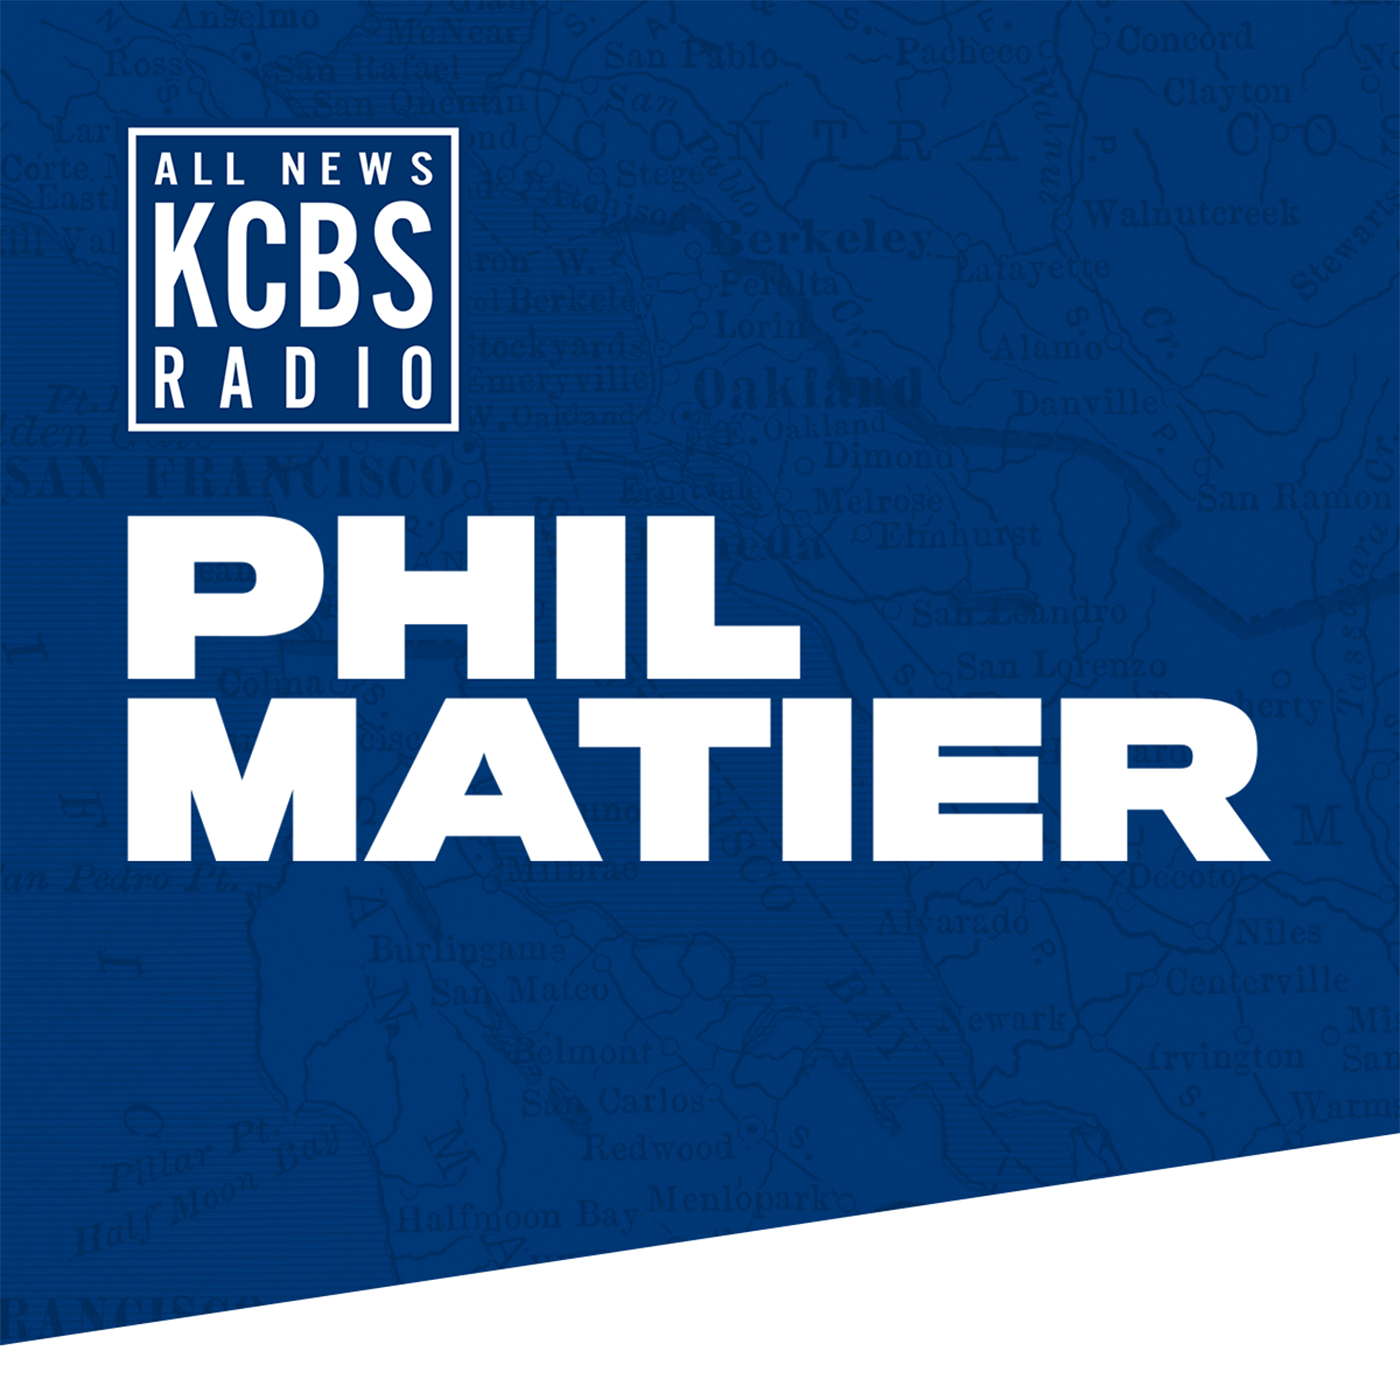 Phil Matier: Millions of dollars pouring in to tight state House races